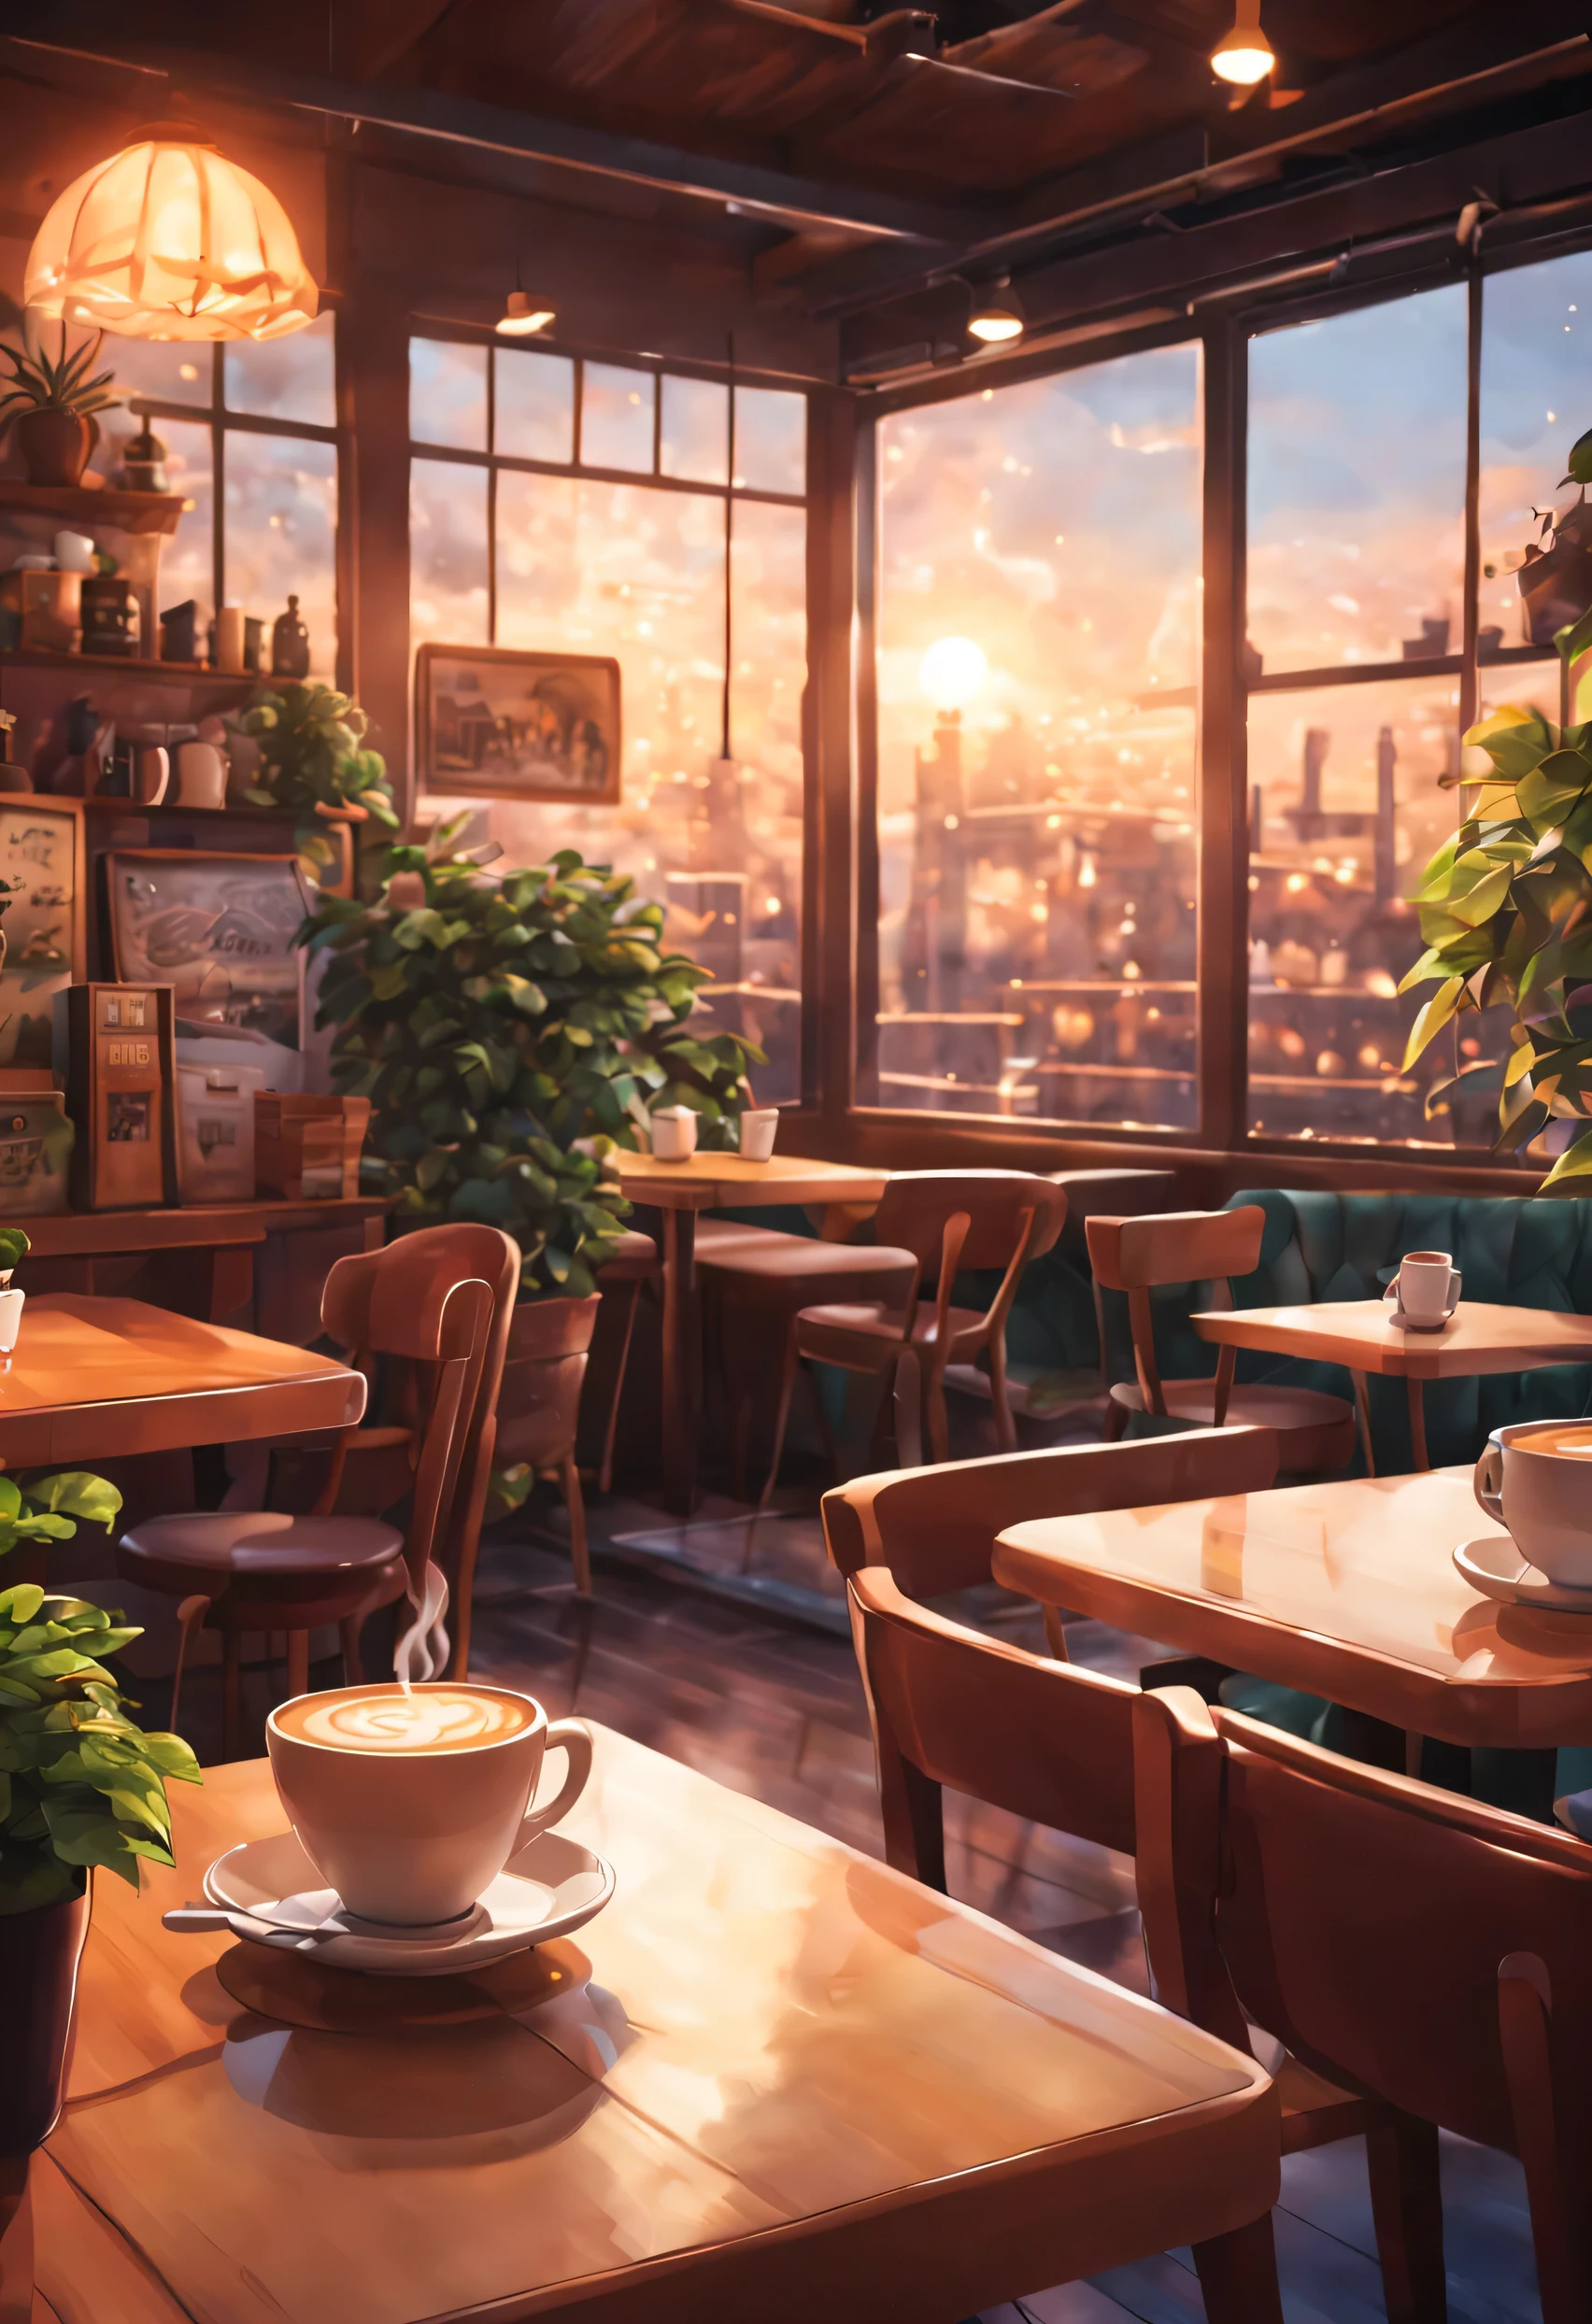 Anime-style, horizontal, the interior of a coffee shop is illustrated with intricate details and vibrant colors. Delicate steam rises from the hot coffee cup on the table, seats are with soft cushions, a lot of potted plants, adding to the cozy and inviting atmosphere. Soft lighting casts a warm and beautiful glow over the dreamy scene, it's evening time, making it an ideal place to unwind and escape reality. (Prompt B and C) Anime-style coffee shop interior, hot coffee steaming on the table, creating a cozy, beautiful and dreamy ambiance. (High resolution, 8k) Very detailed anime illustration of a coffee shop interior, showcasing a hot cup of coffee on a table, evoking a warm and cozy